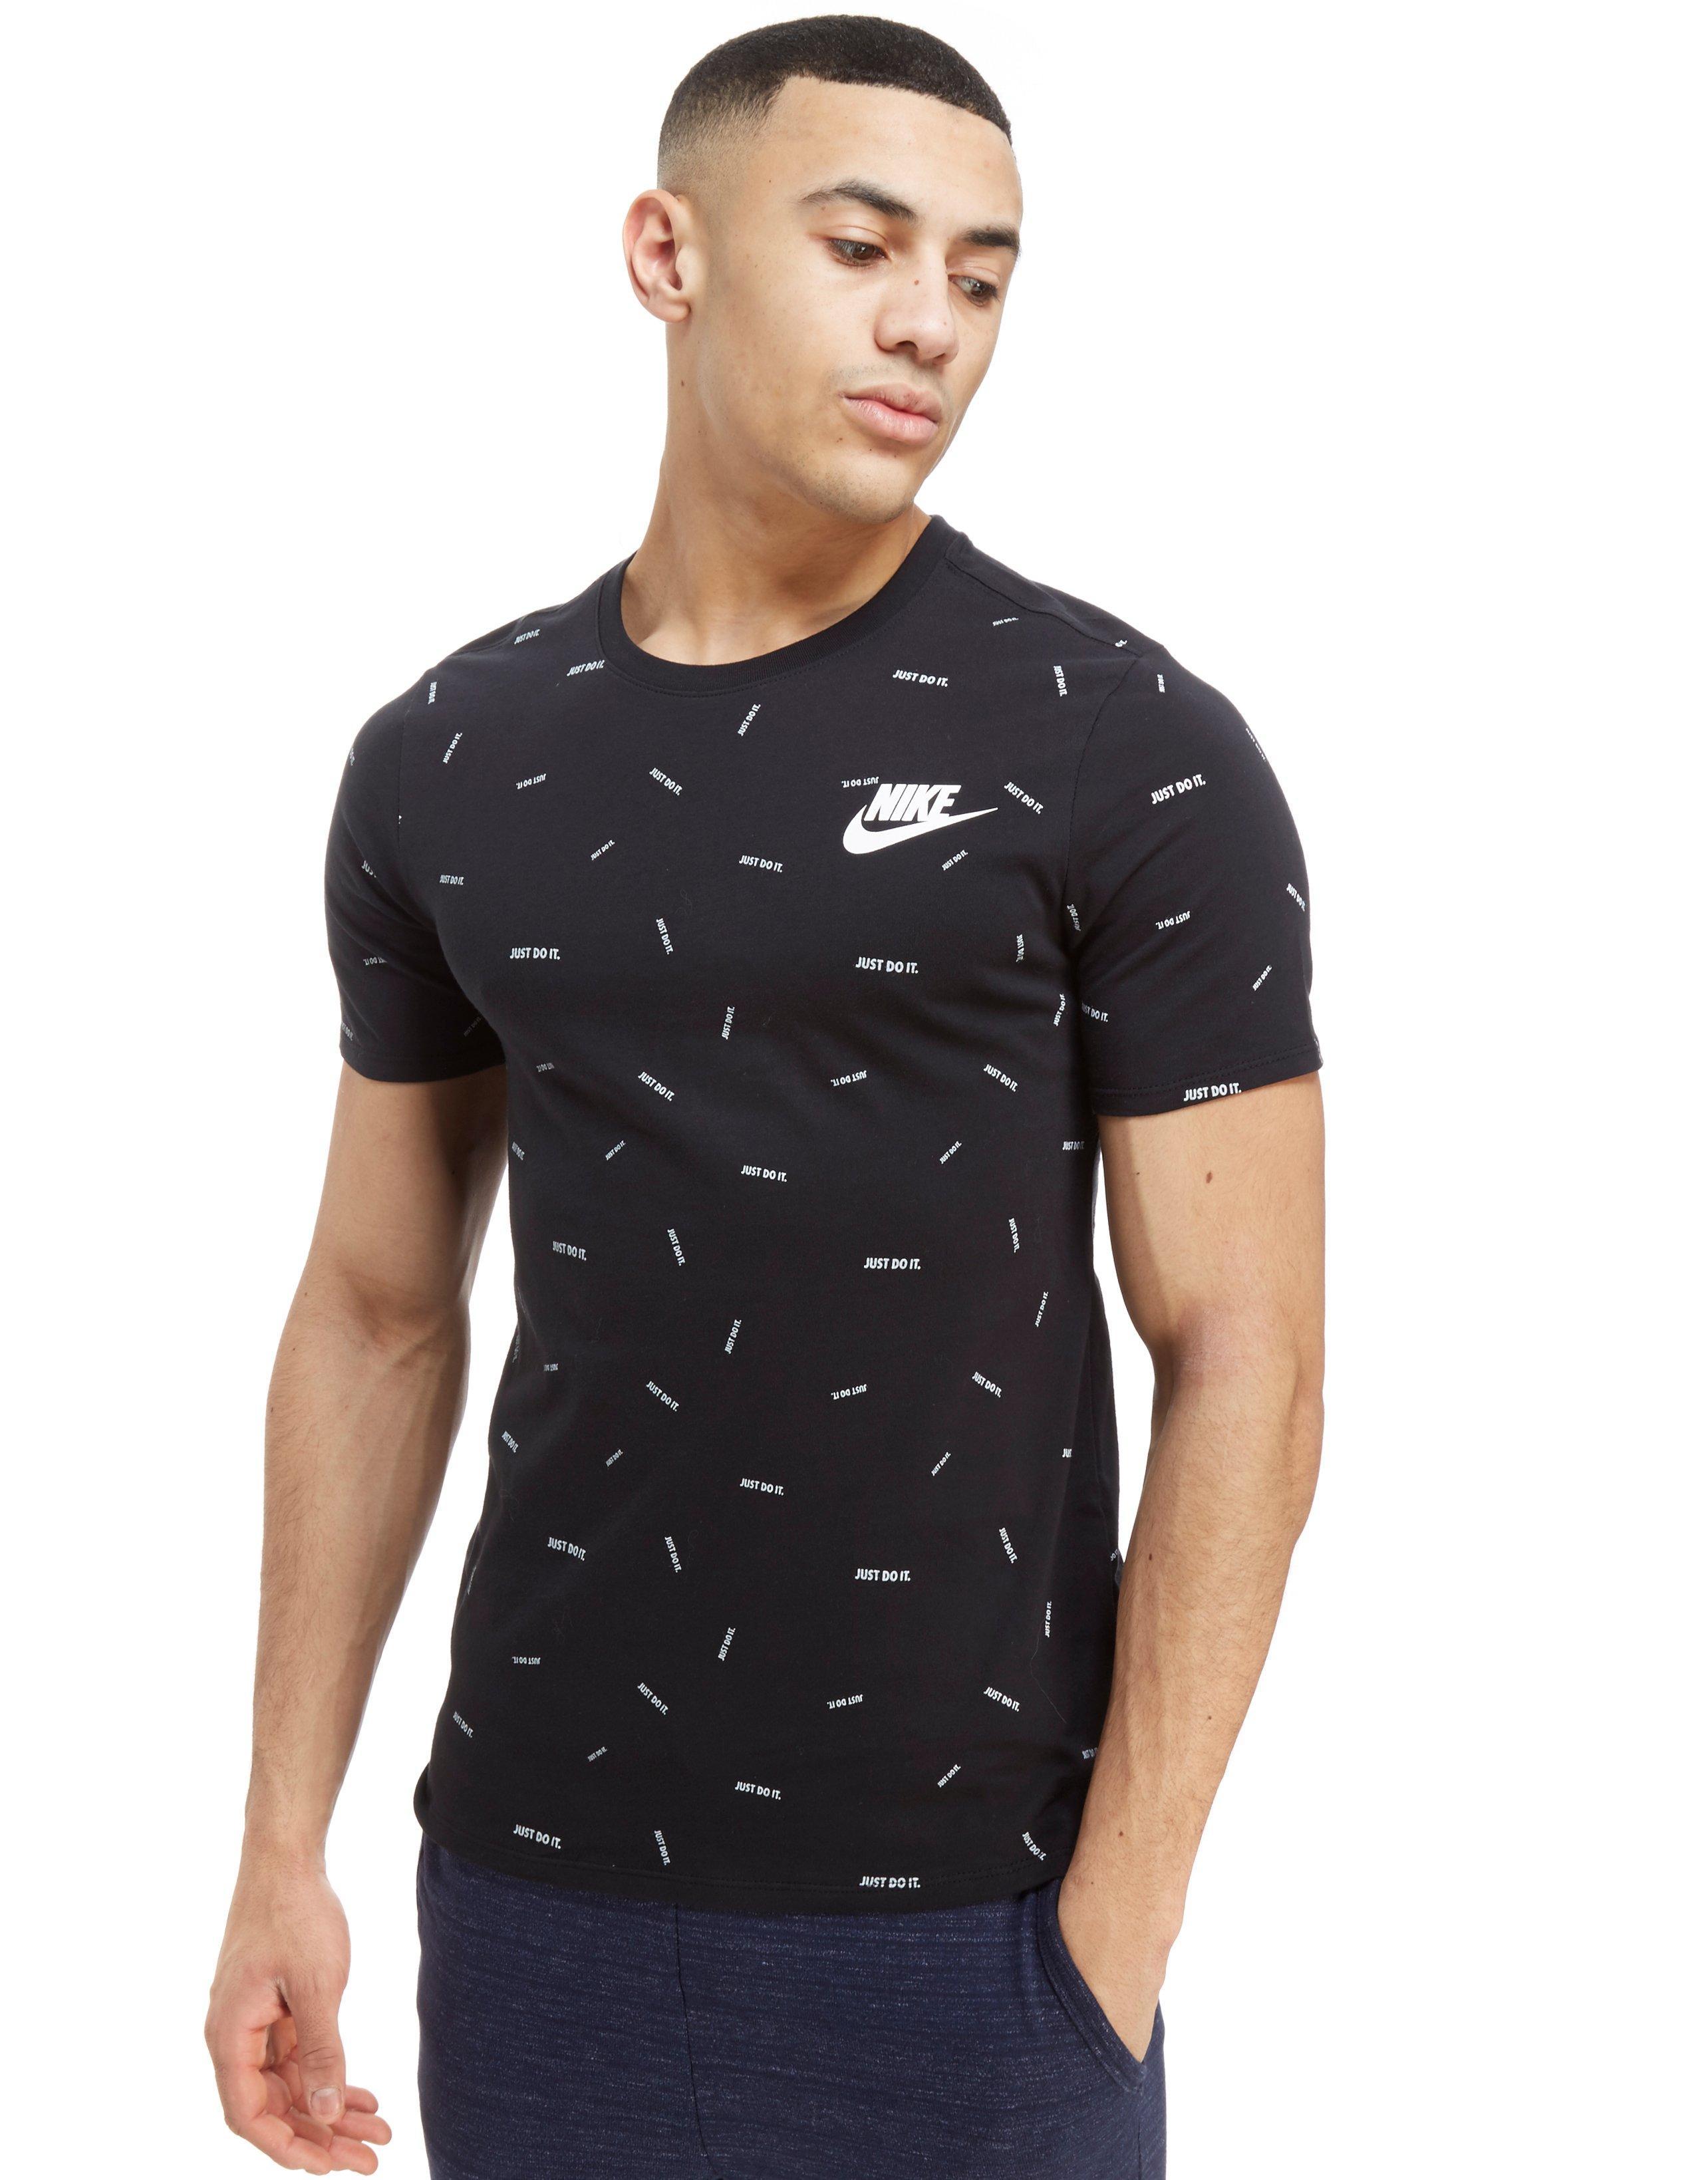 Nike Cotton Just Do It All Over Print T-shirt in Black for Men - Lyst